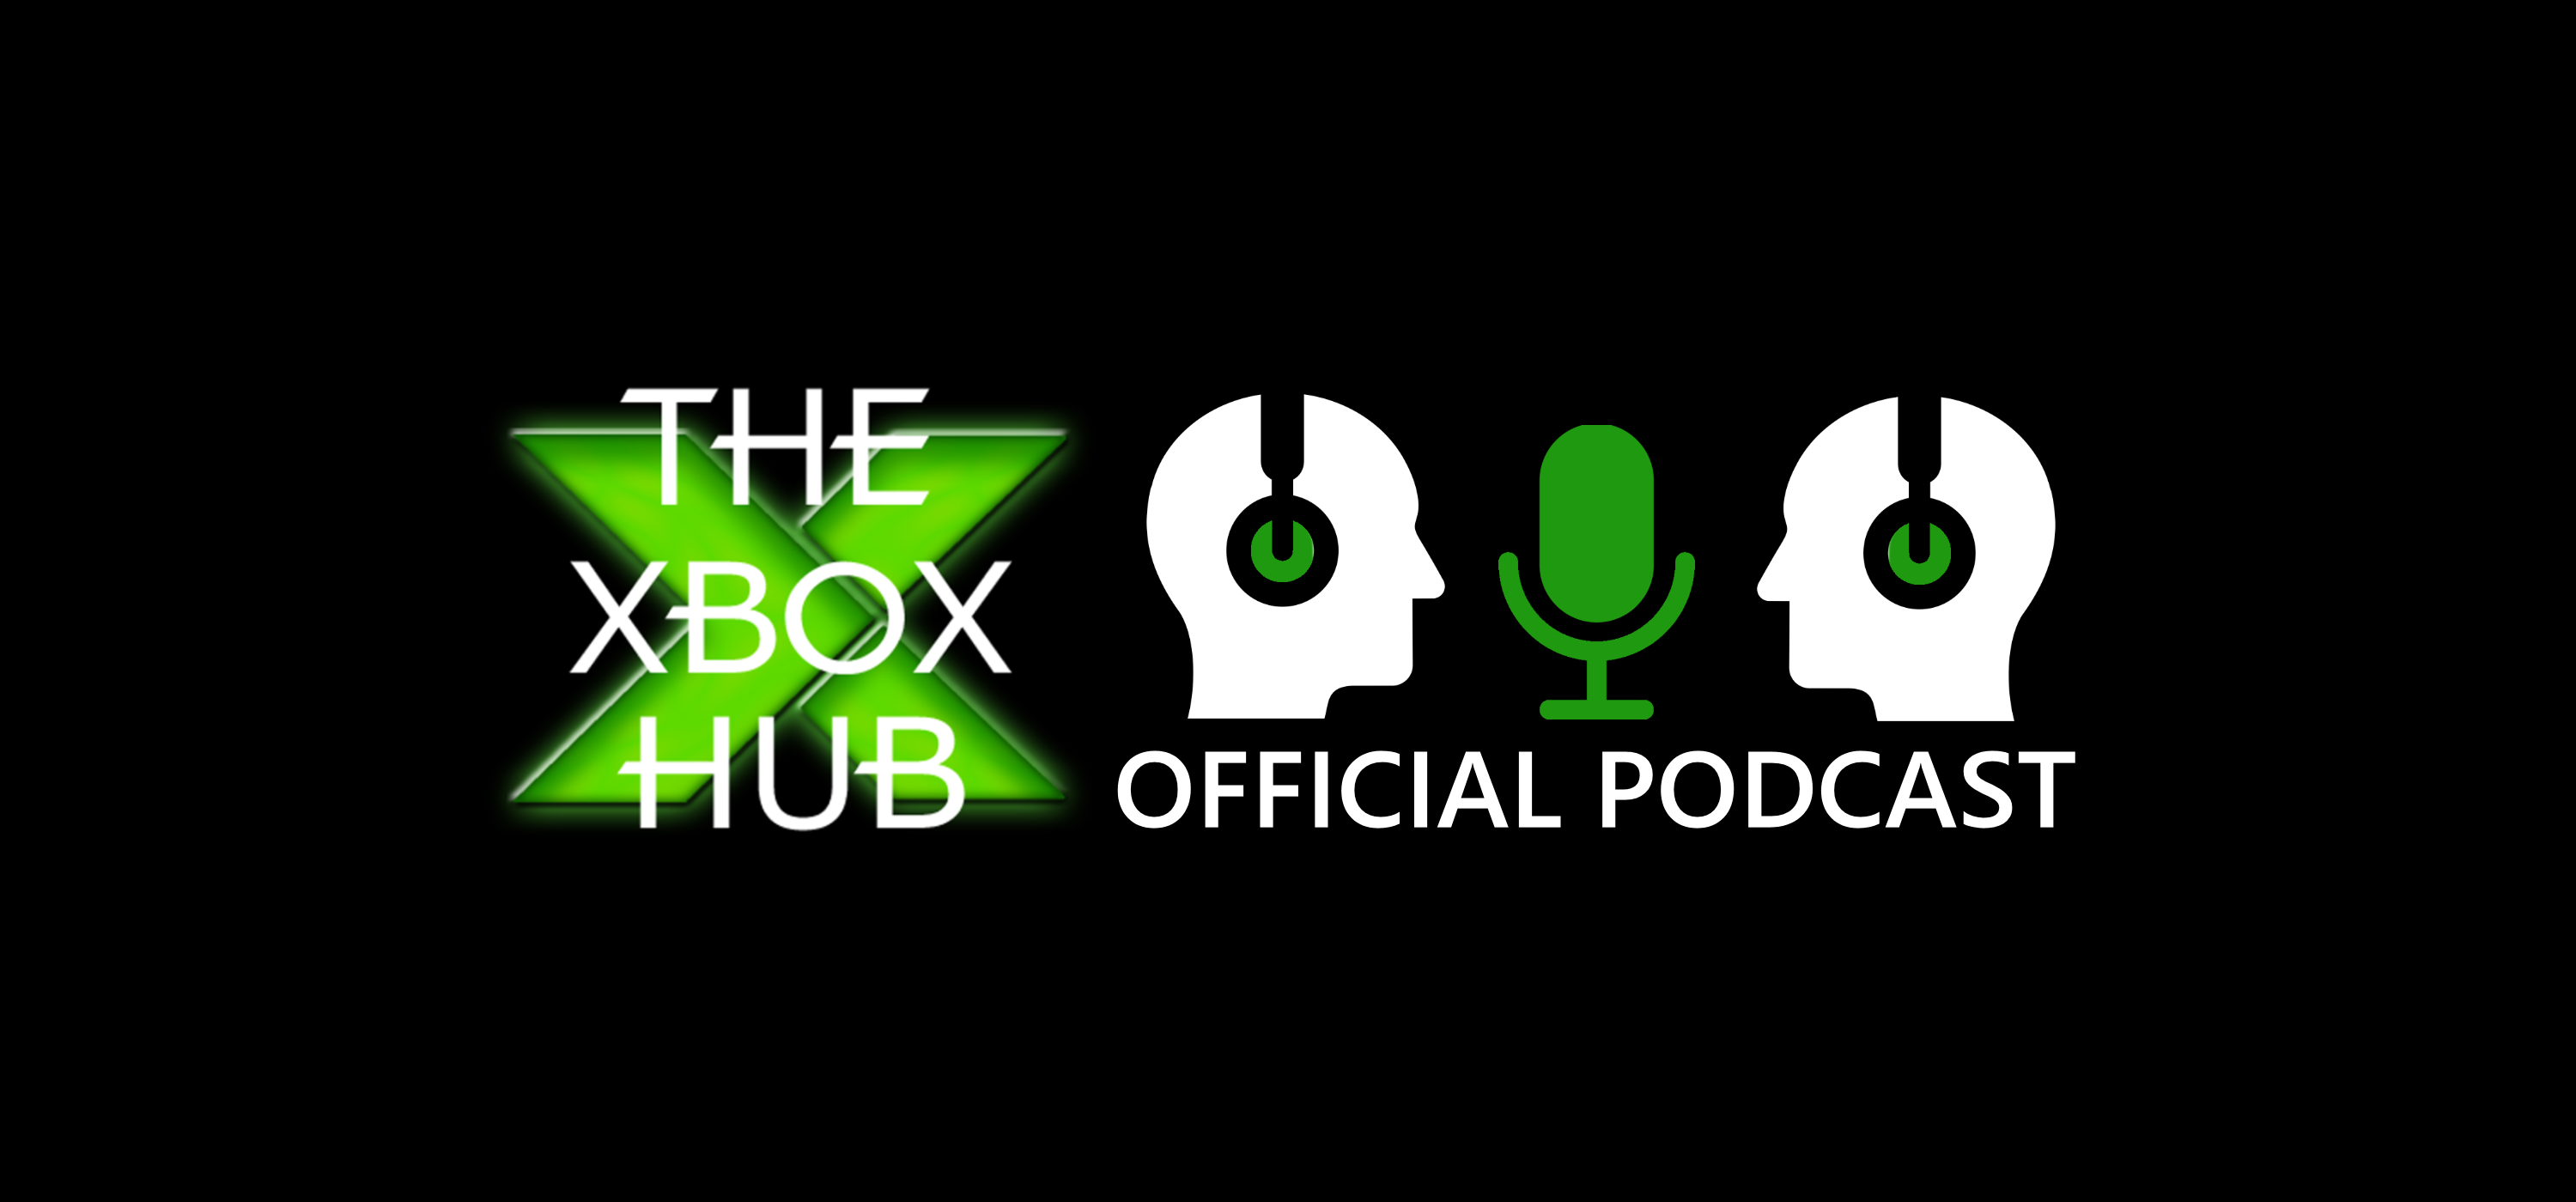 TheXboxHub Official Podcast Episode 139: Ubisoft, Disney and Marvel